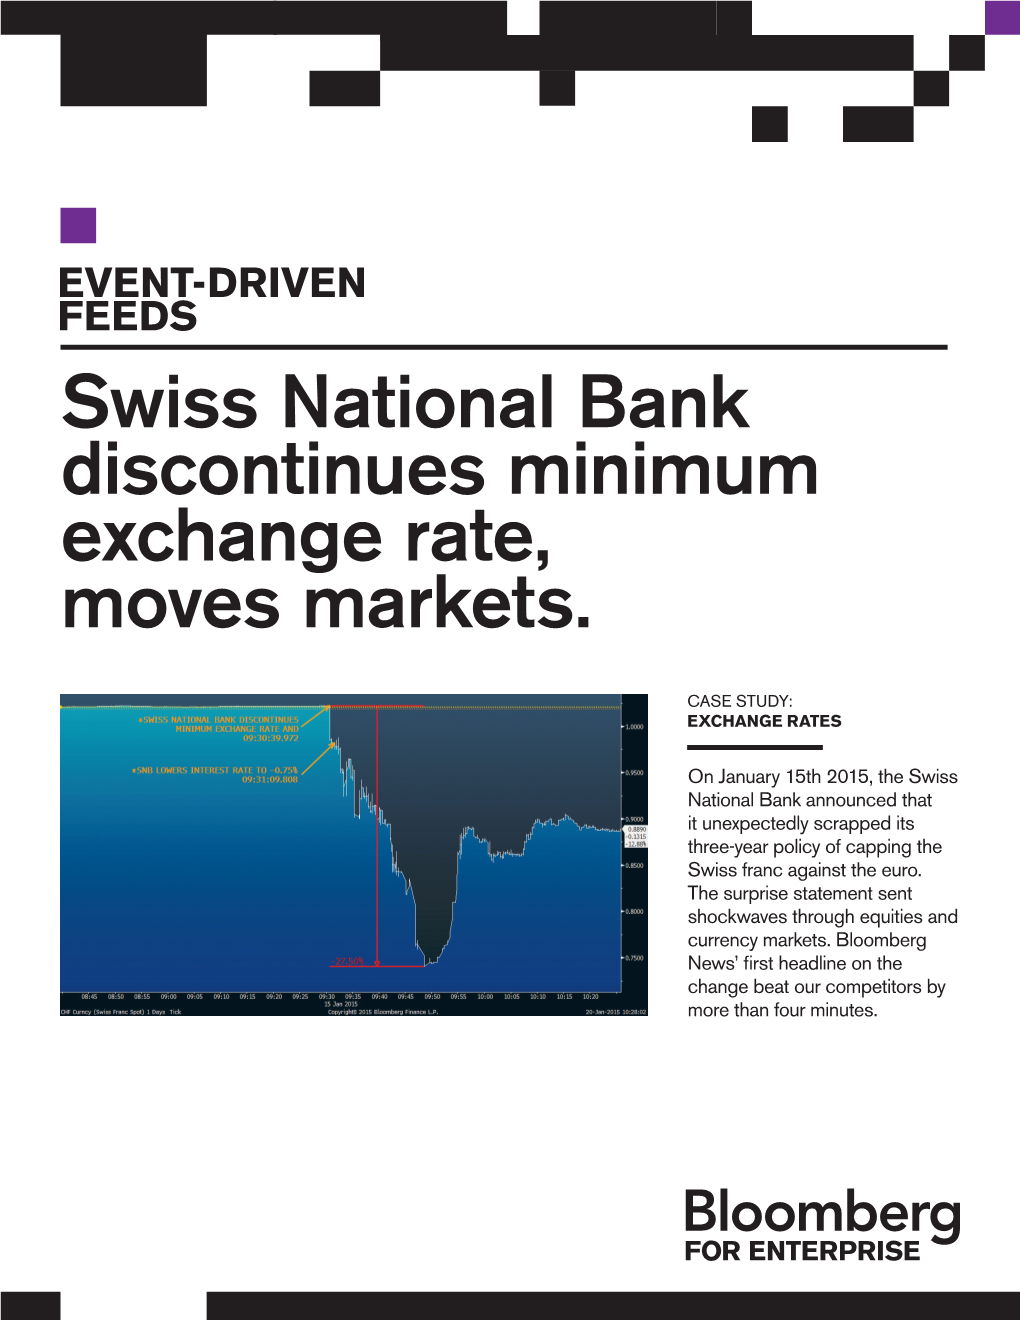 Swiss National Bank Discontinues Minimum Exchange Rate, Moves Markets